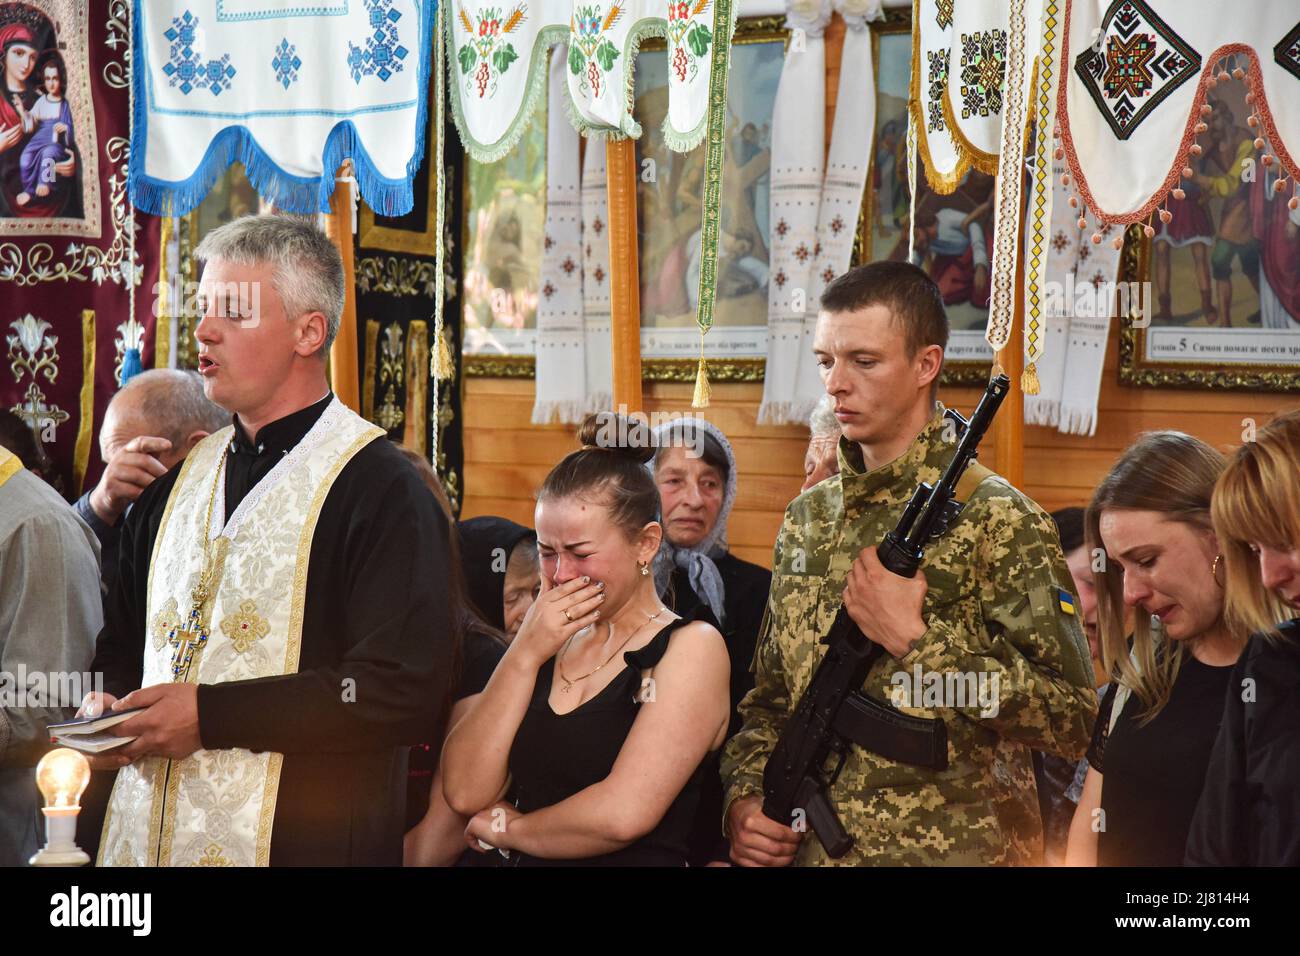 A woman cries in a church at the village of Kulchytsia, Lviv region, during the funeral of senior soldier Petro Sarakulo, who died in the Donetsk region due to Russia's military invasion of Ukraine. Funeral of senior soldier Petro Sarakulo in his native village of Kulchytsi, Lviv region. Due to the Russian military invasion of Ukraine on February 24, 2022, he went to serve in the Armed Forces of Ukraine. He died on May 5 in the Donetsk region during a battle with the Russian occupiers. The deceased is survived by his wife and two children - daughter Milana and son Alexander. (Photo by Pavlo Pa Stock Photo